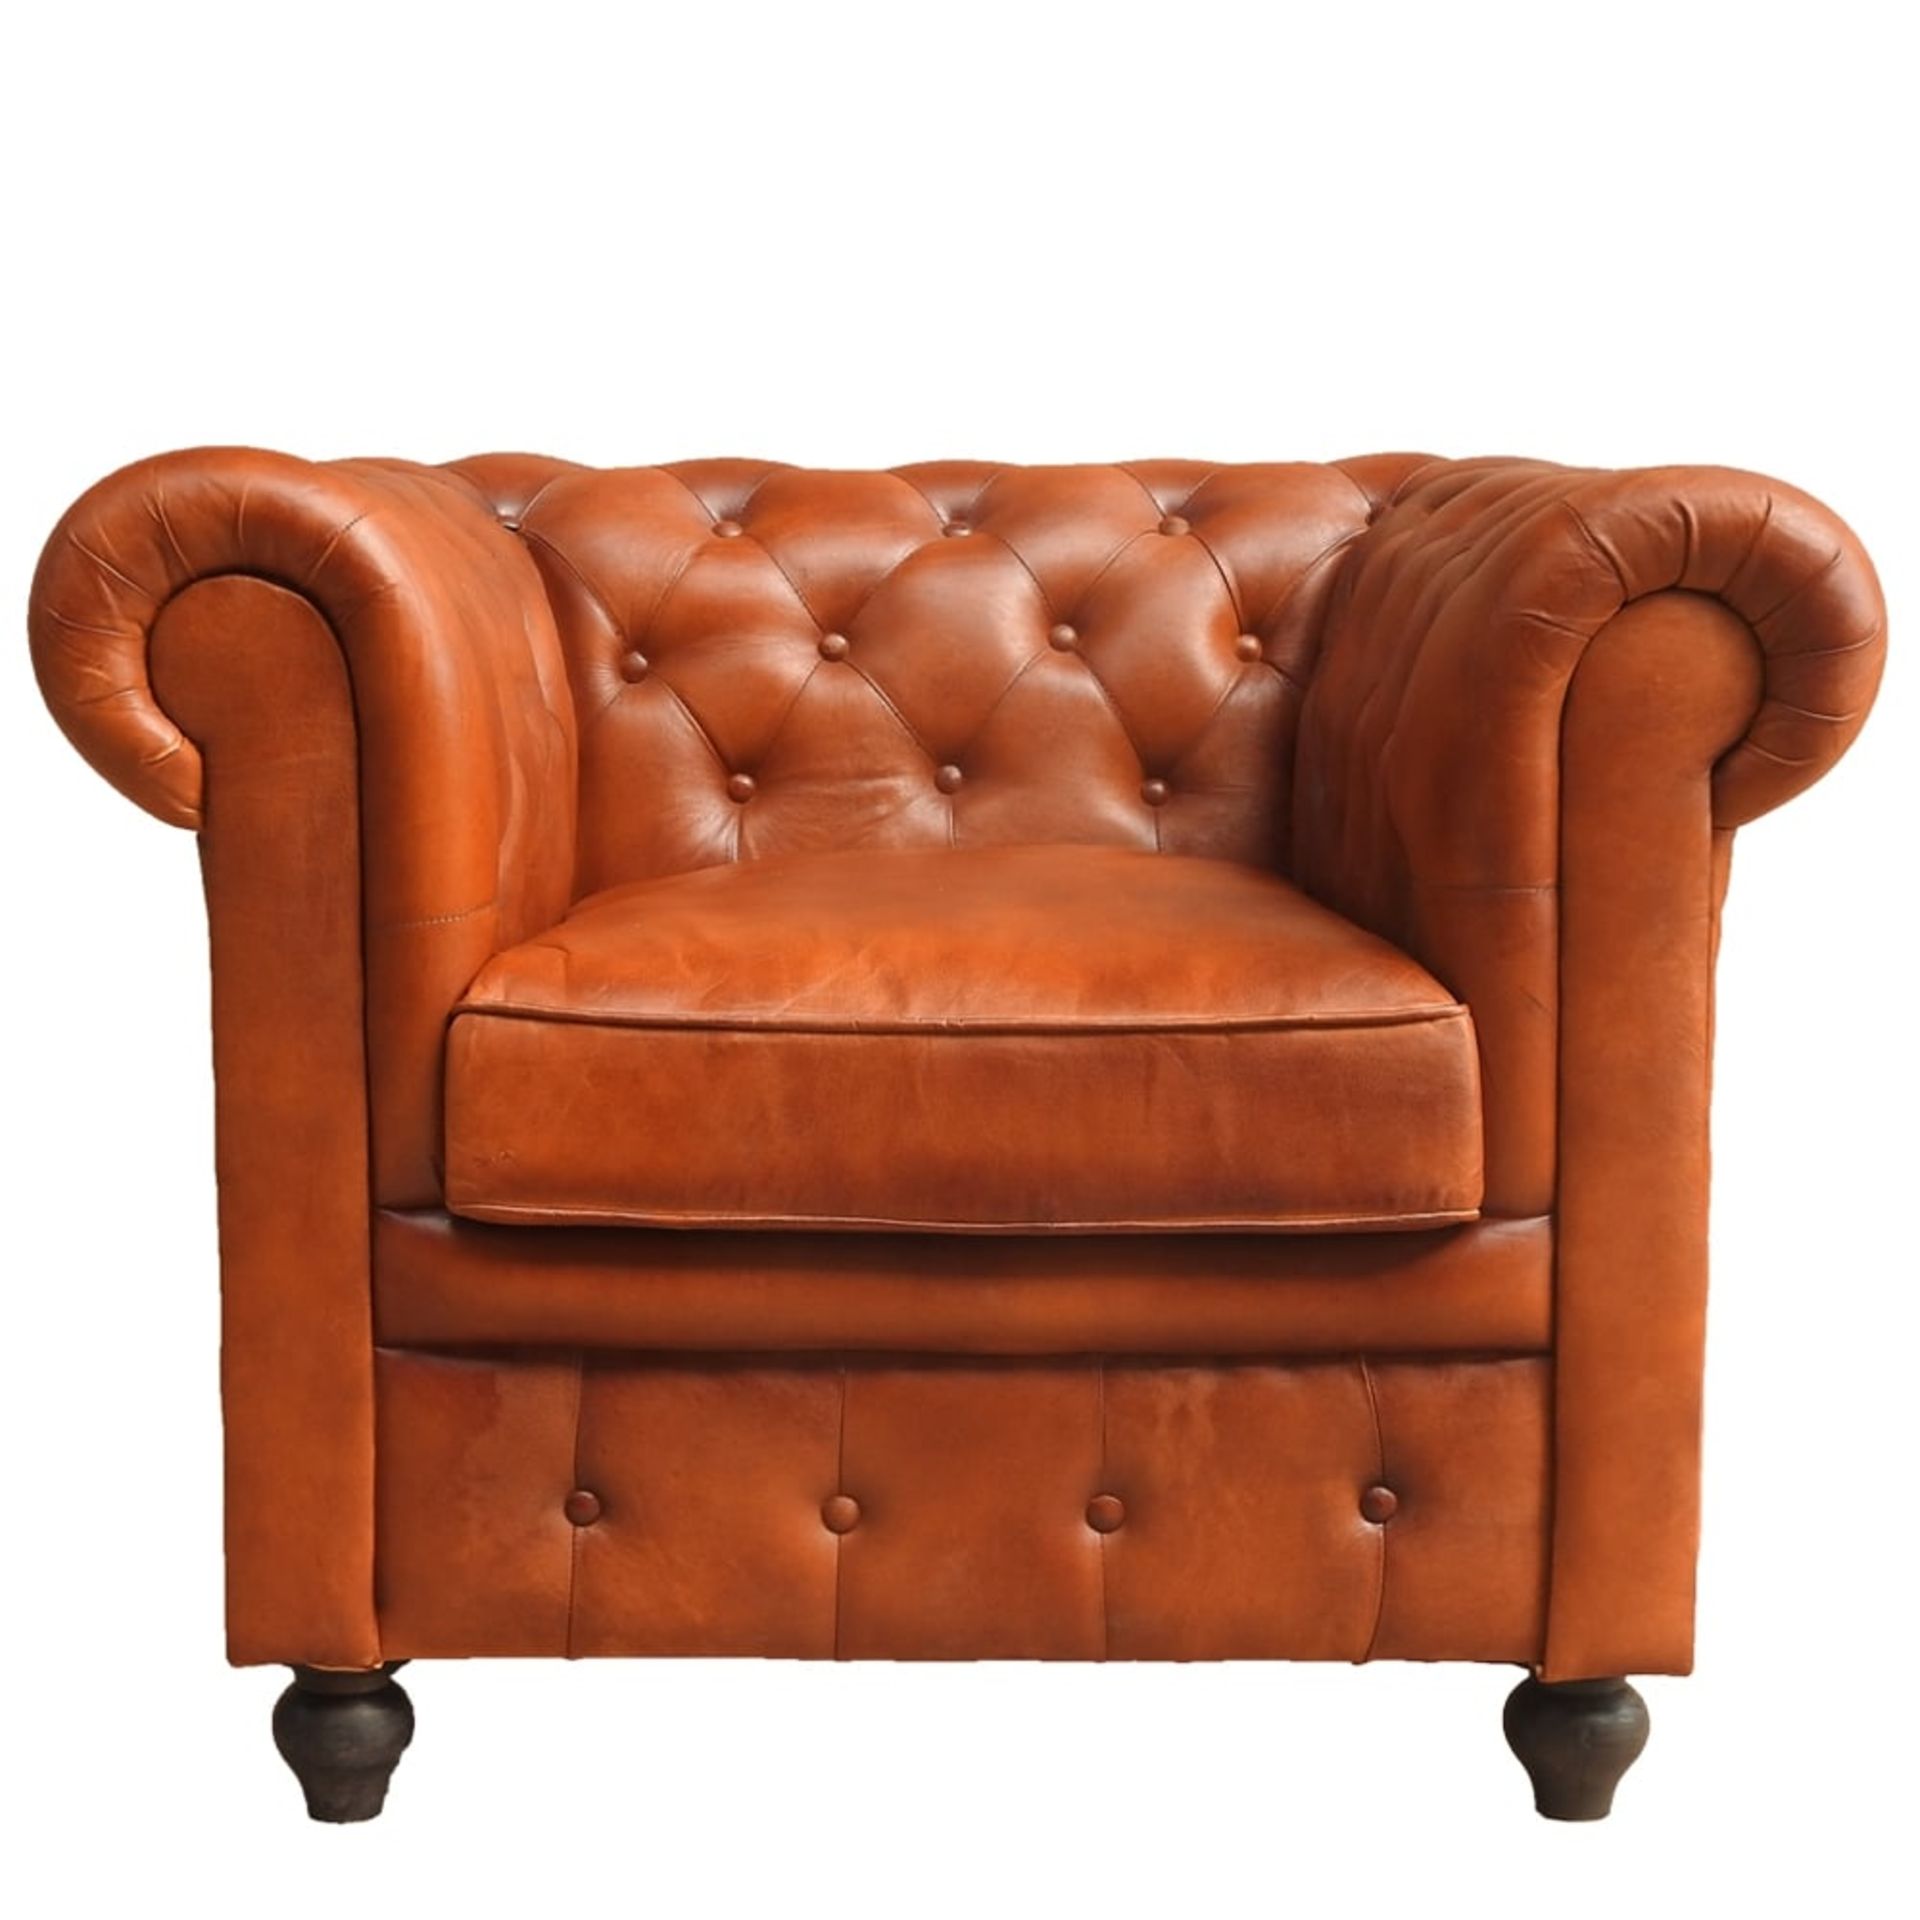 "Shoreditch Low Back Leather Chesterfield Club Armchair In Tan